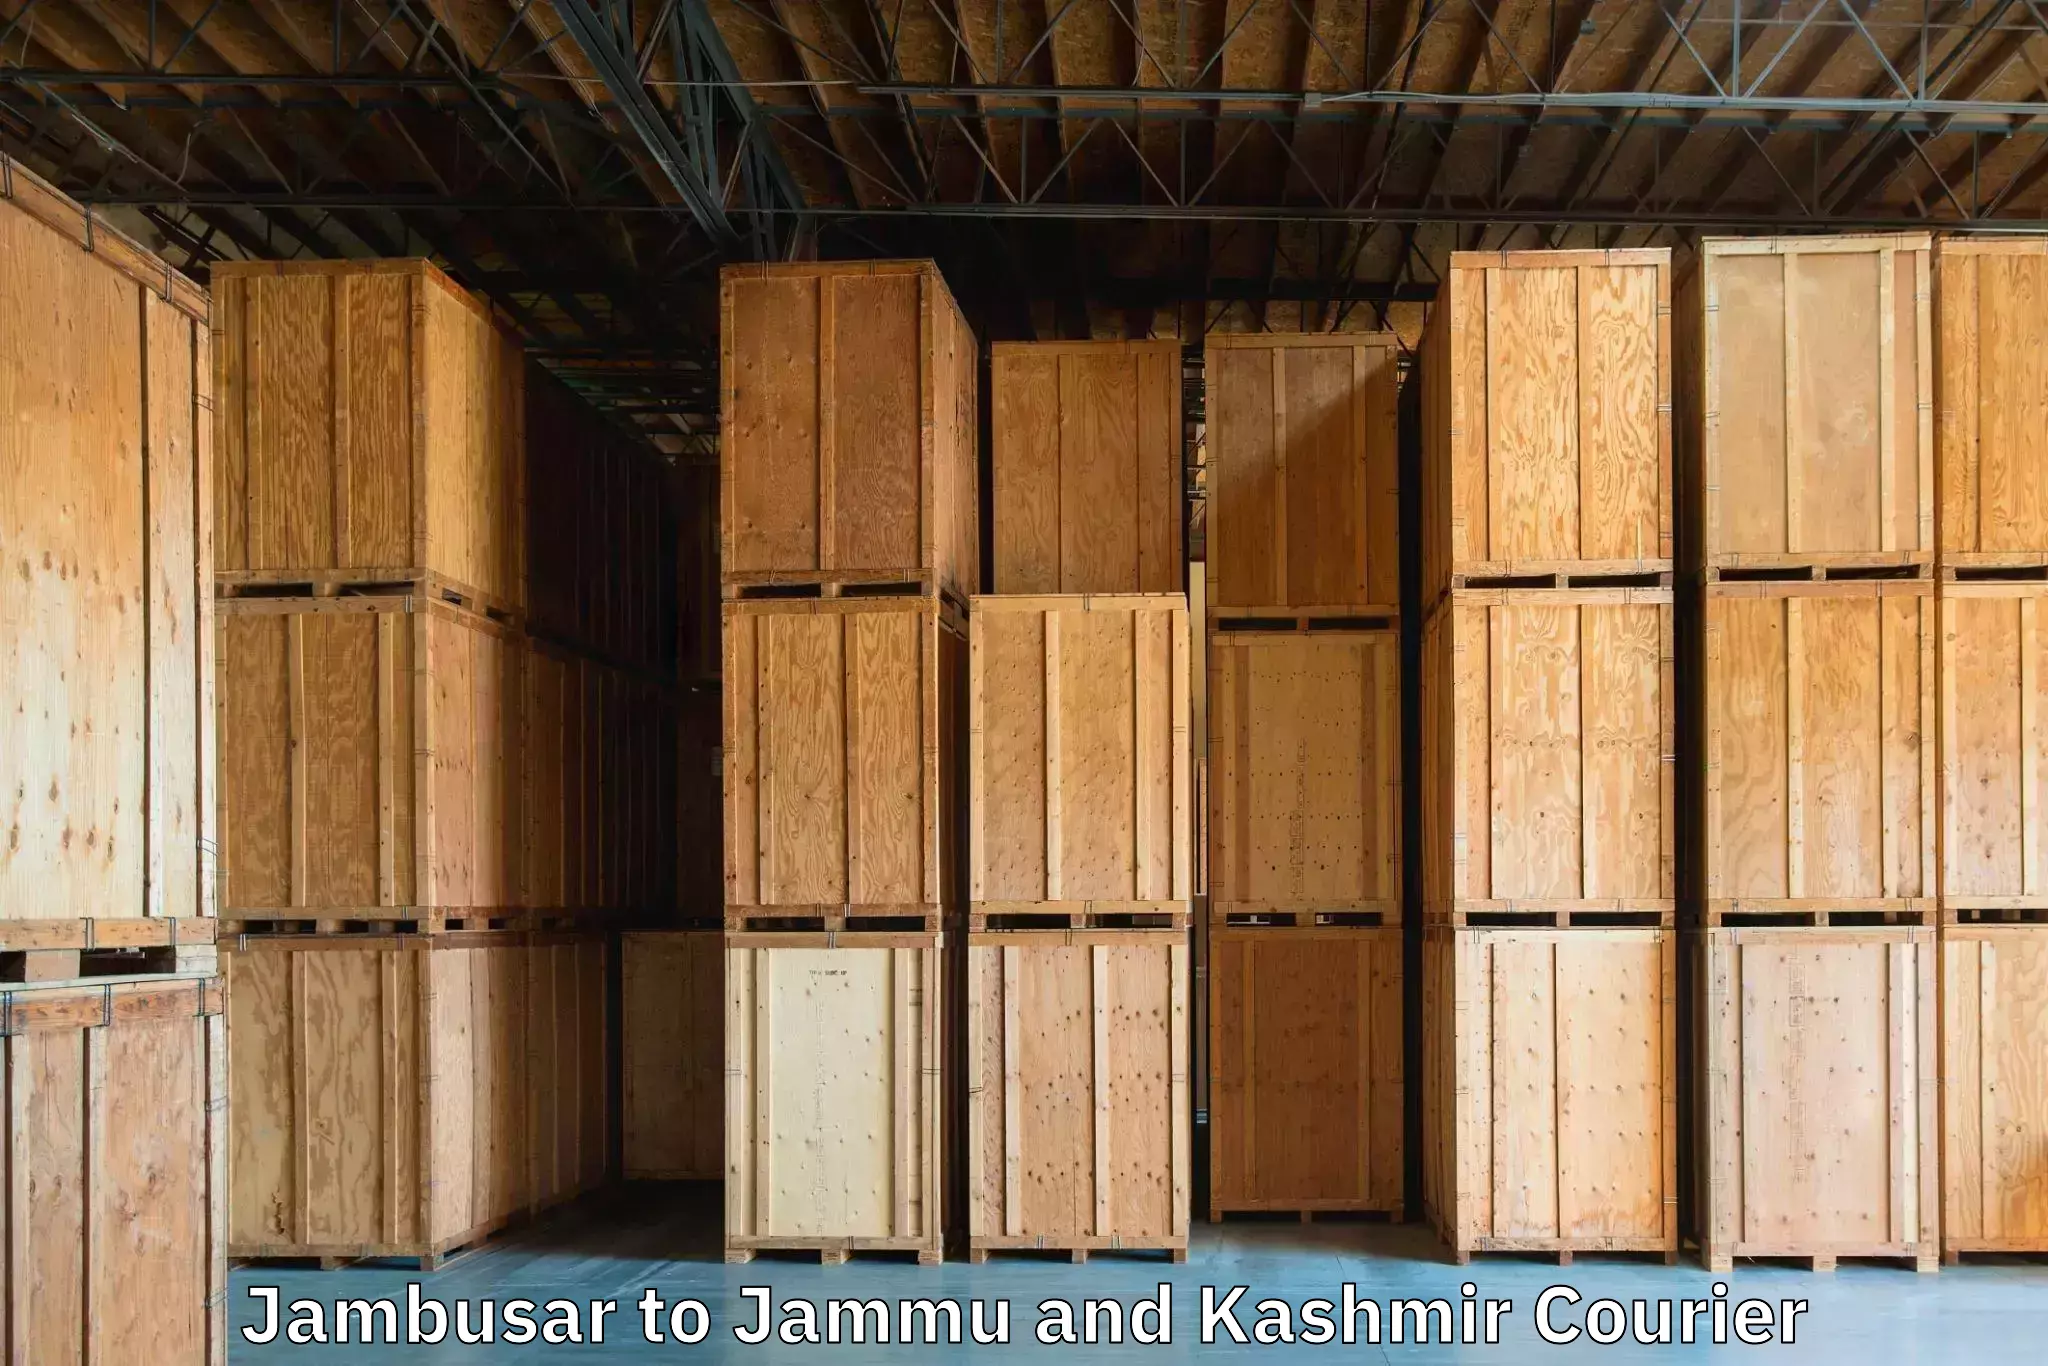 Reliable baggage delivery in Jambusar to Pulwama